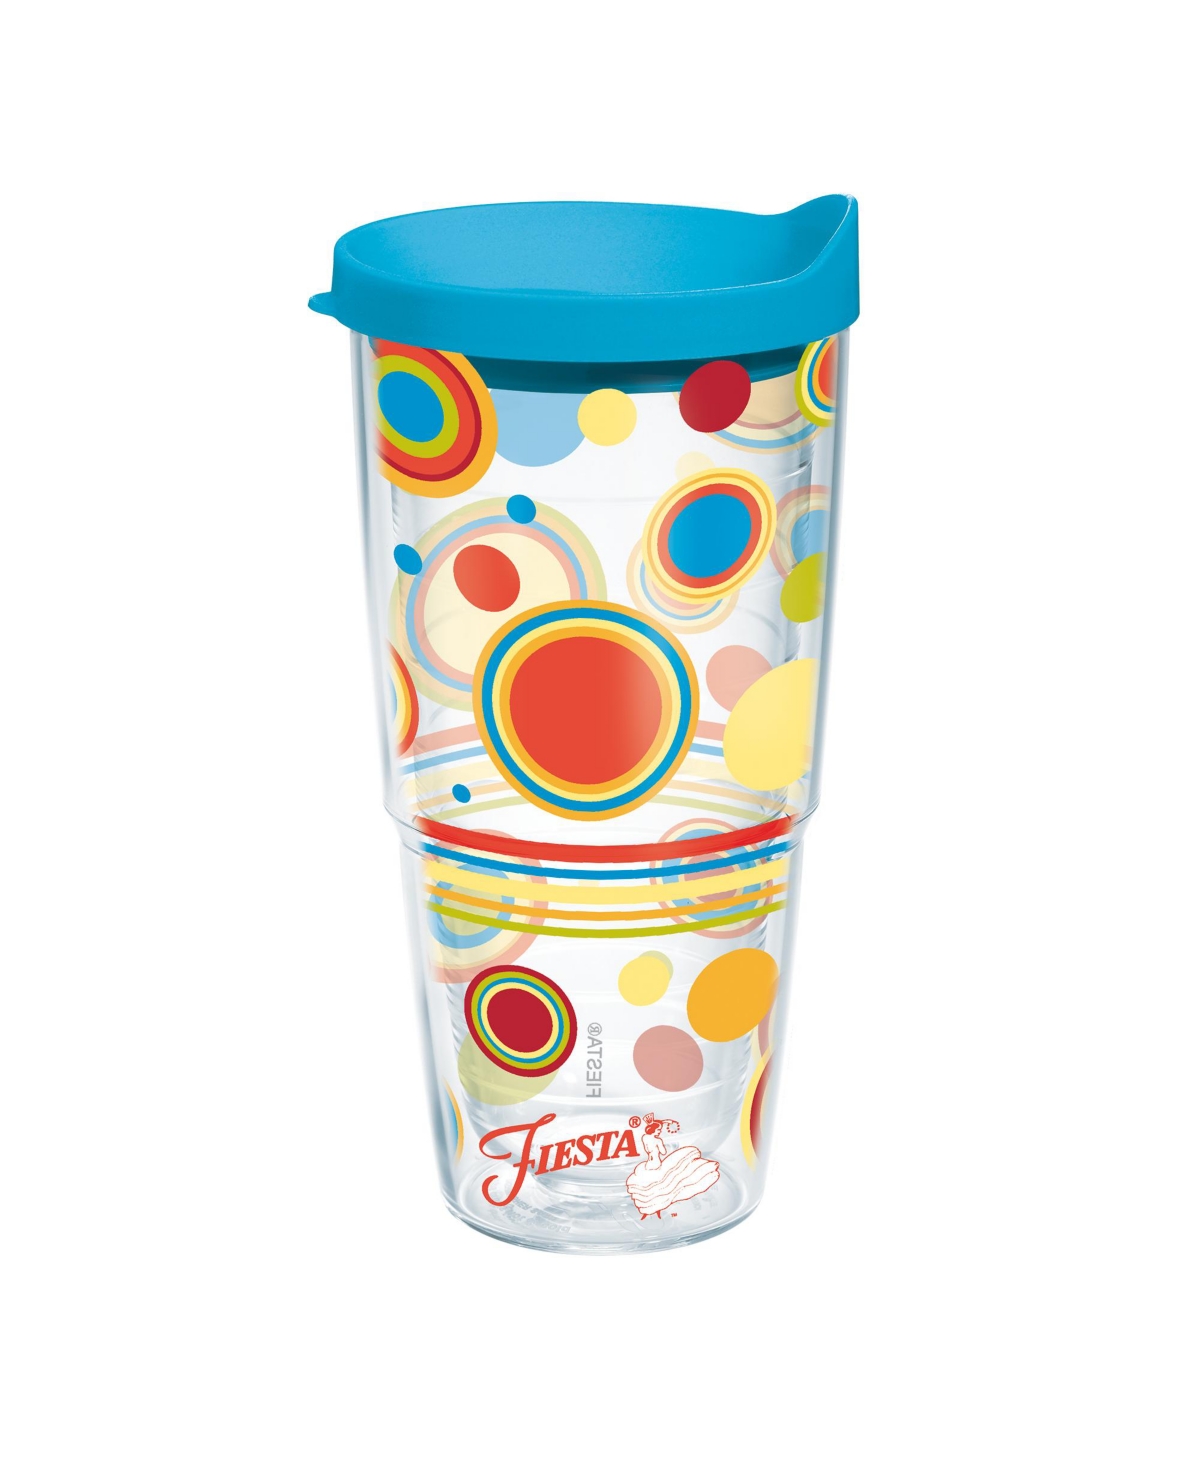 Tervis Tumbler Tervis Fiesta Poppy Dots Made In Usa Double Walled Insulated Tumbler Travel Cup Keeps Drinks Cold & In Open Miscellaneous